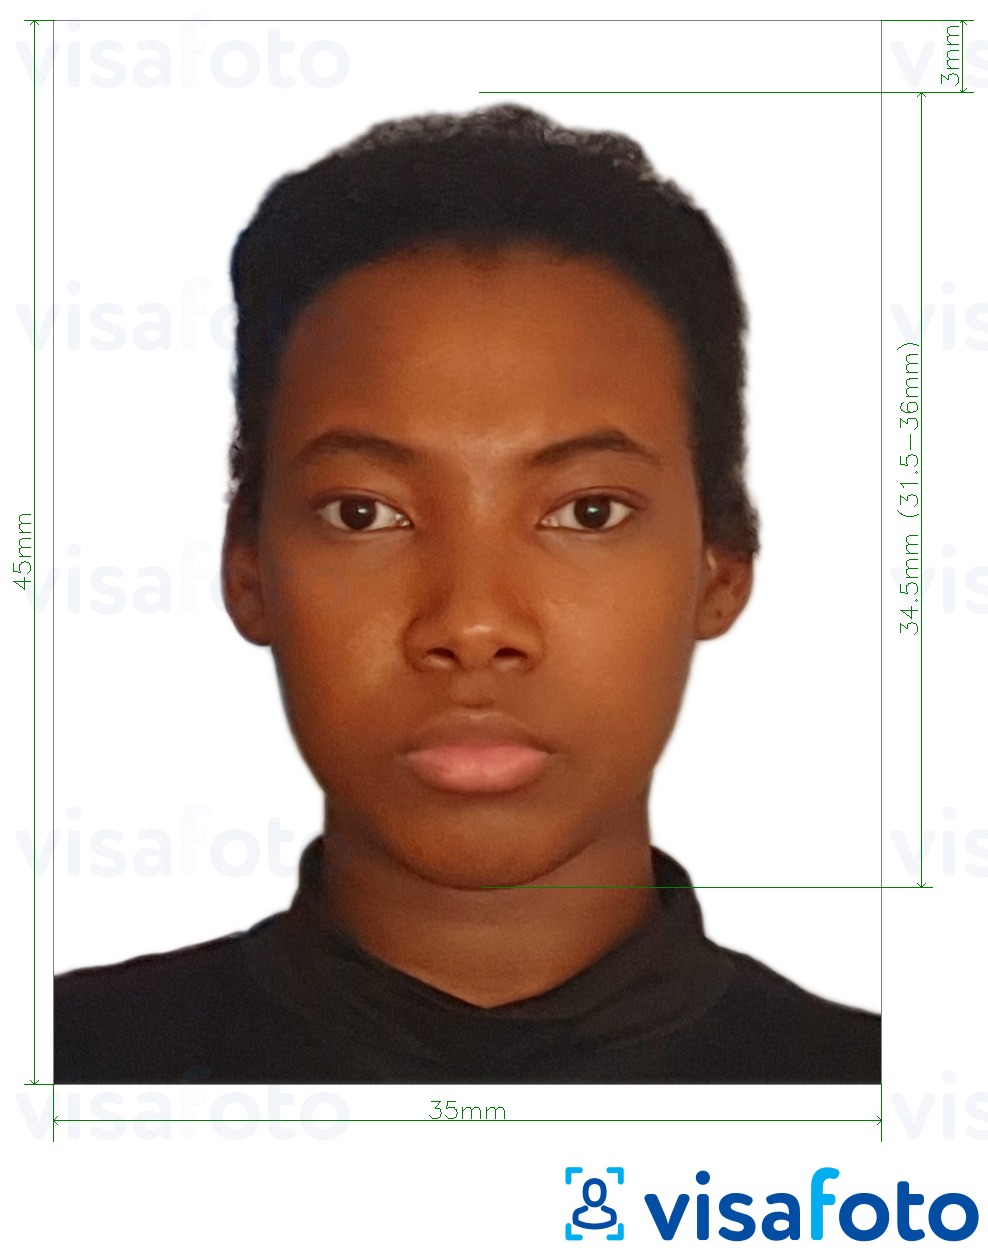 Example of photo for Burkina Faso visa 4.5x3.5 cm (45x35 mm) with exact size specification